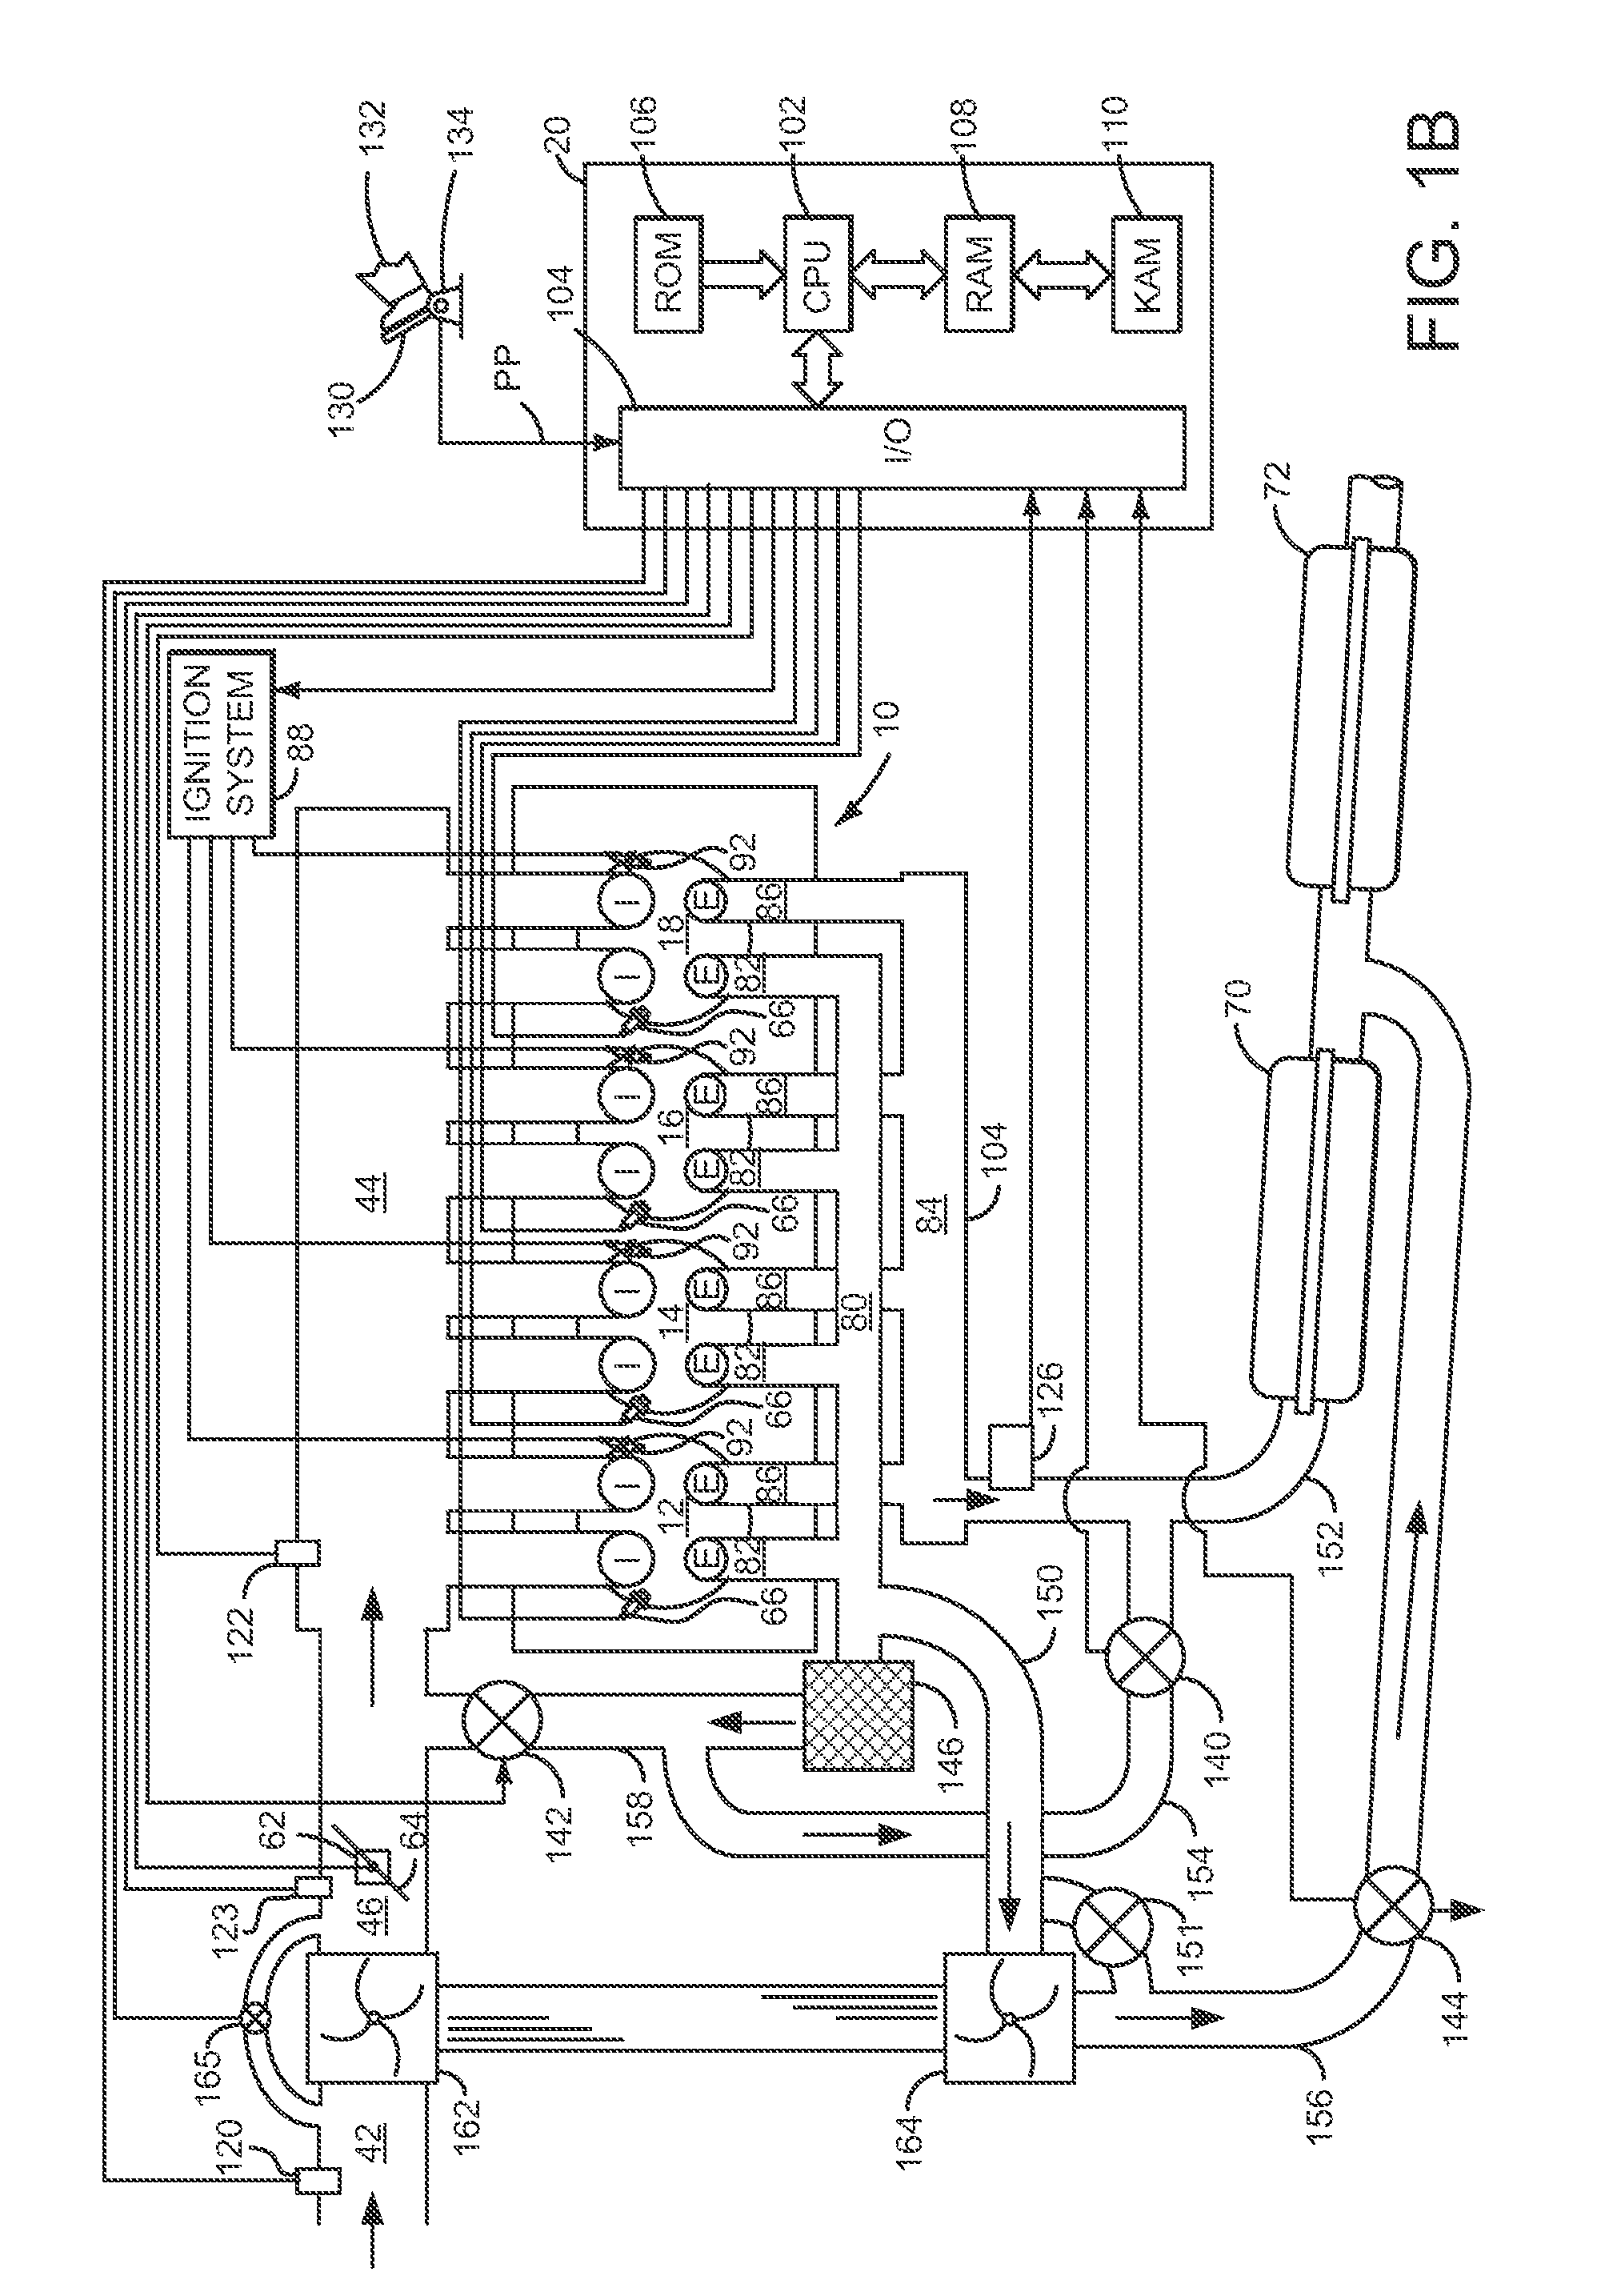 Method and system adjusting an exhaust heat recovery valve